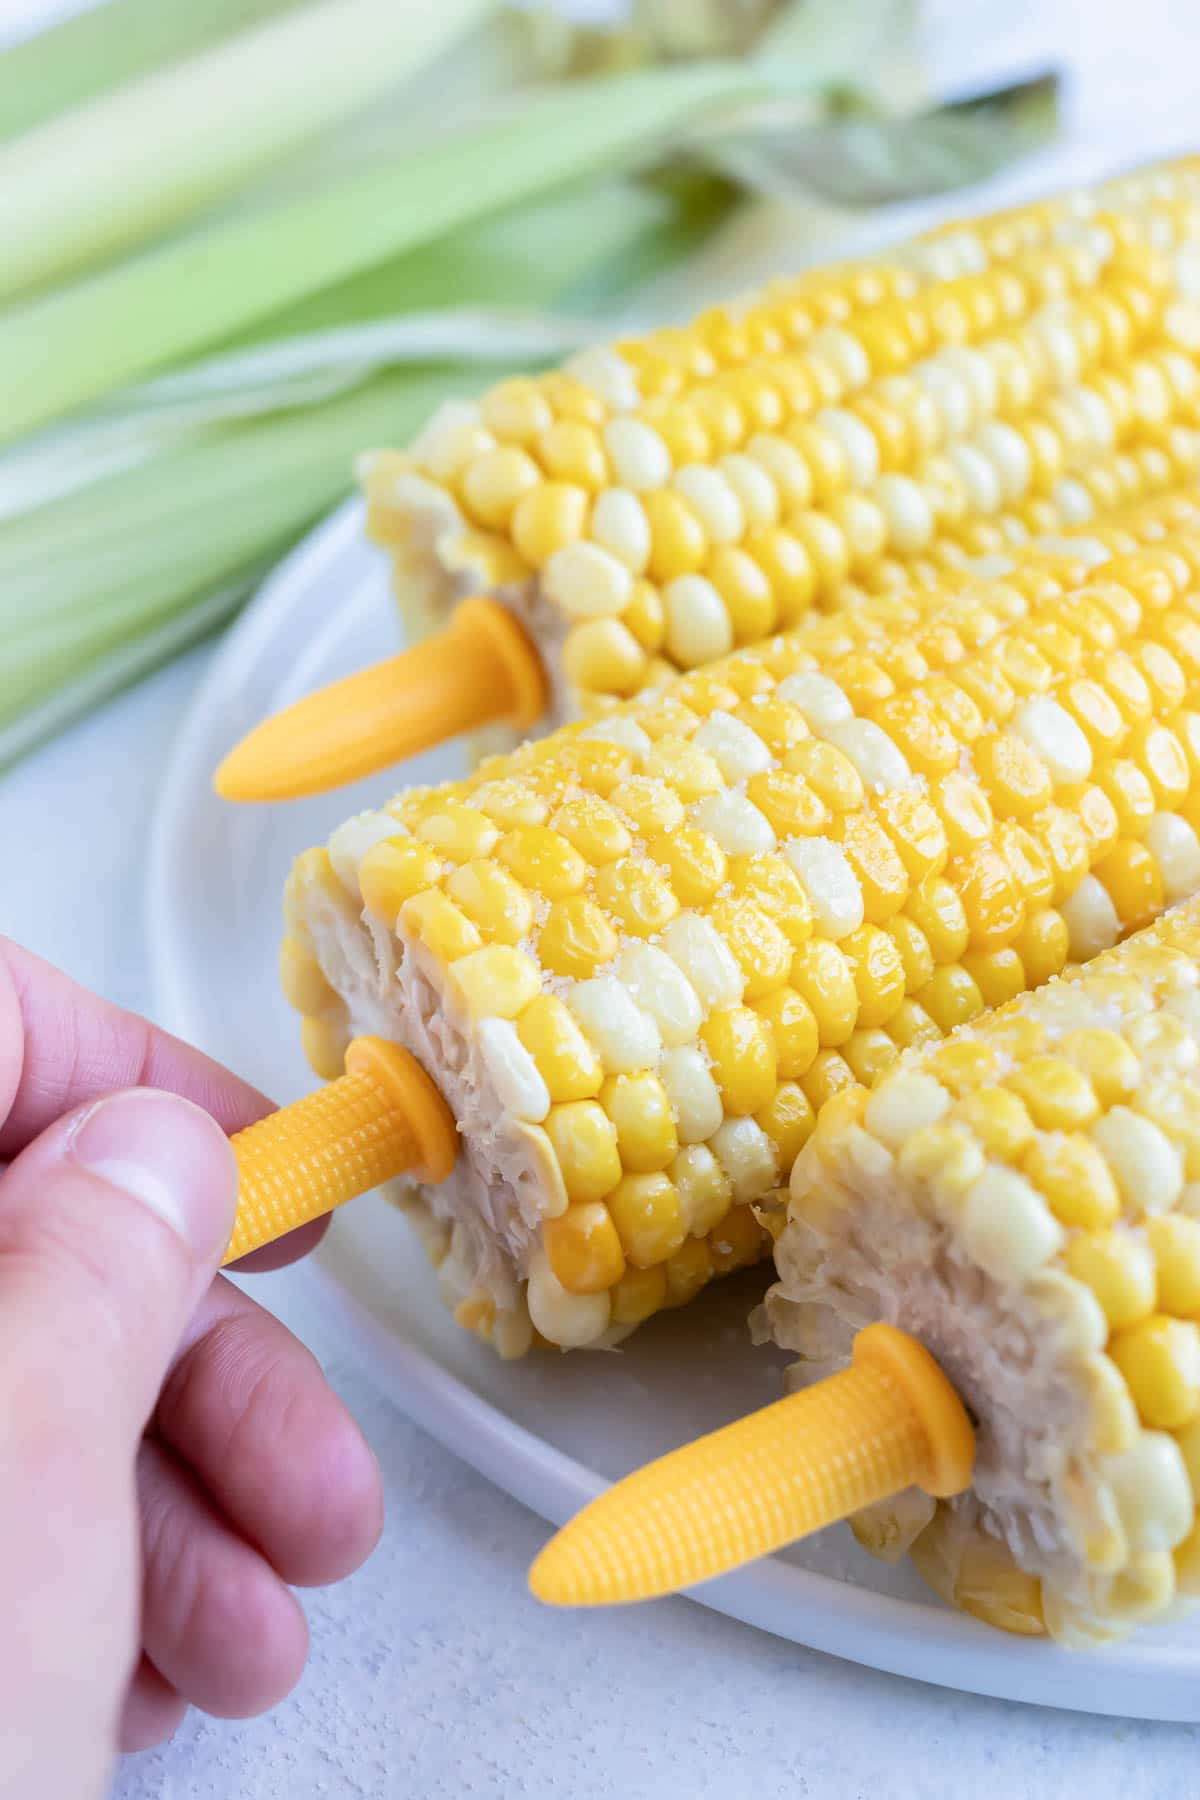 Yellow plastic corn cob holders are used to help hold the corn.